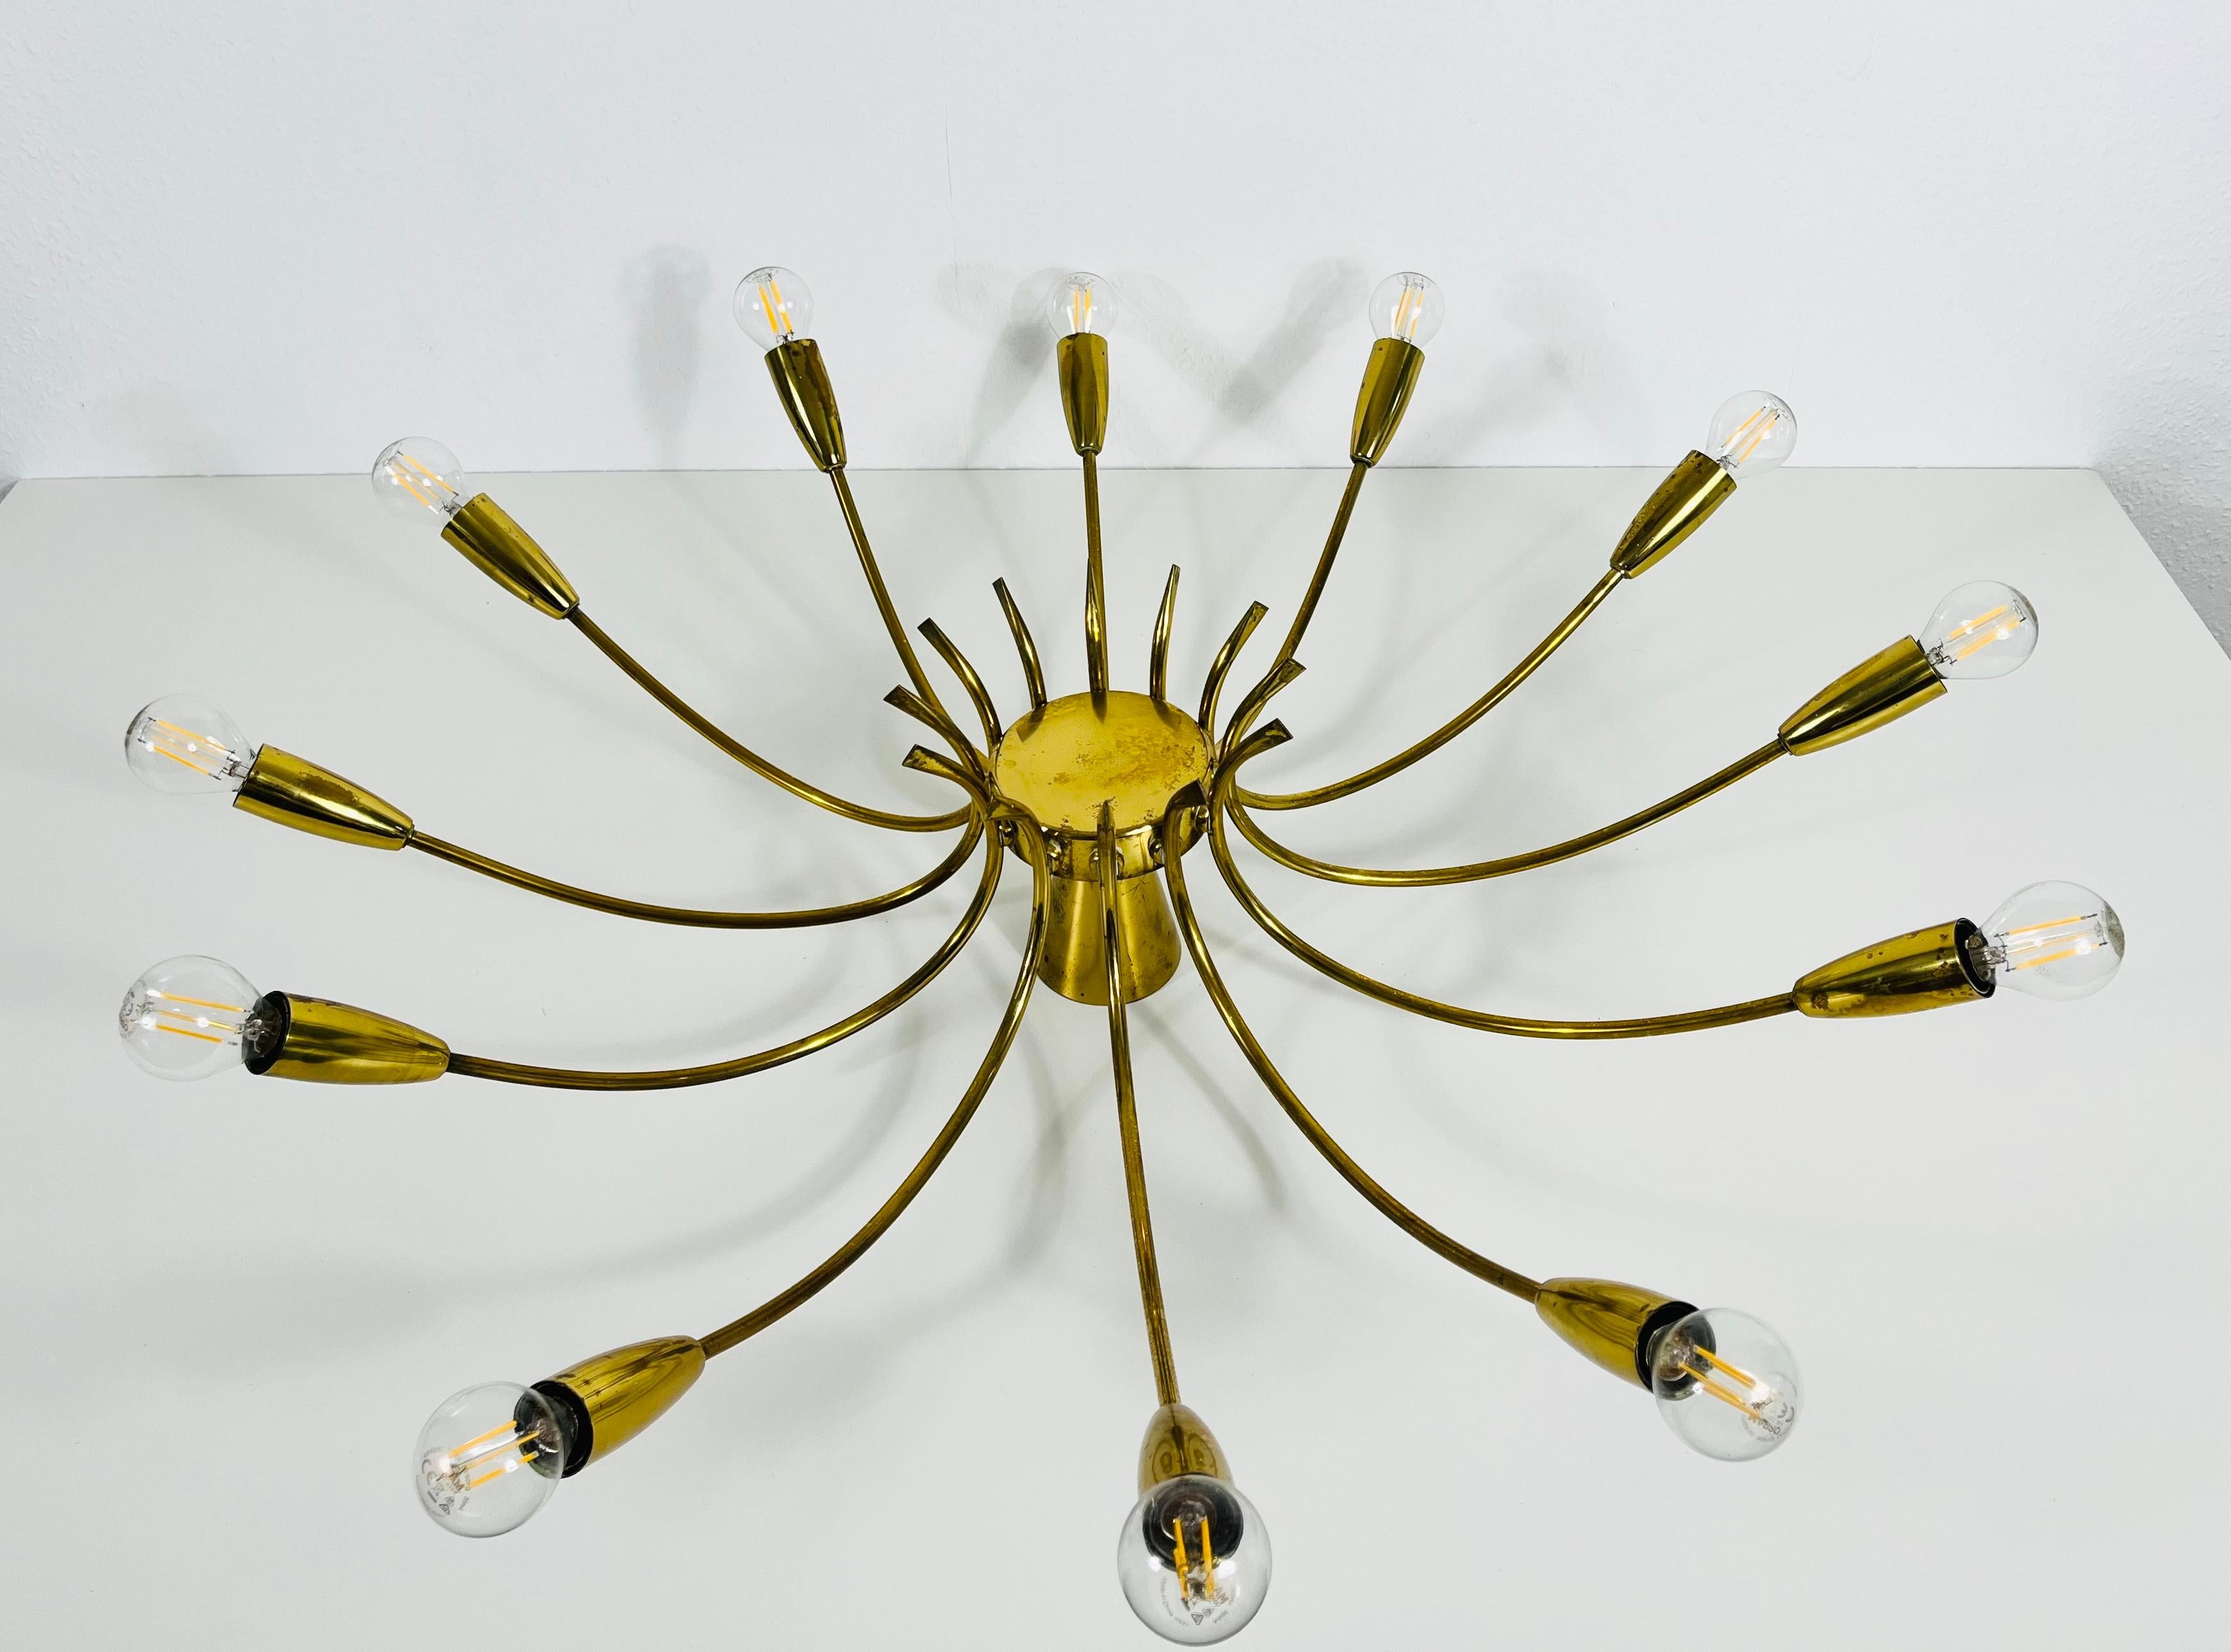 A Sputnik chandelier made in Italy in the 1950s. It is fascinating with its twelve brass arms, each of it with an E14 light bulb. The shape of the light is similar to a spider.

The light requires 12 E14 light bulbs. Works with both 120/220V. Good